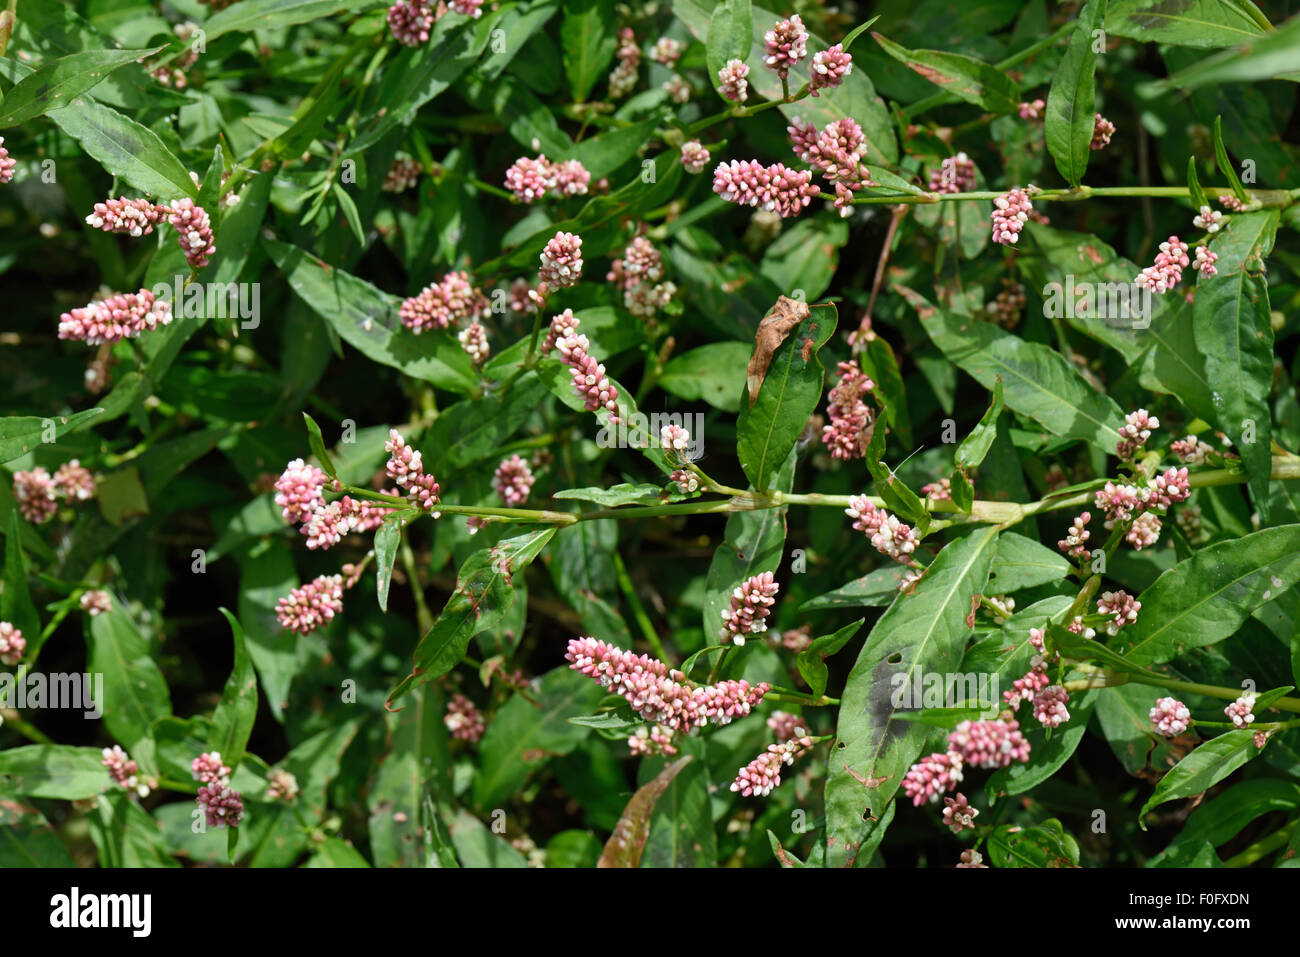 Redshank, Polygonum maculosa, flowering annual arable weed on waste ground, Berkshire, August Stock Photo